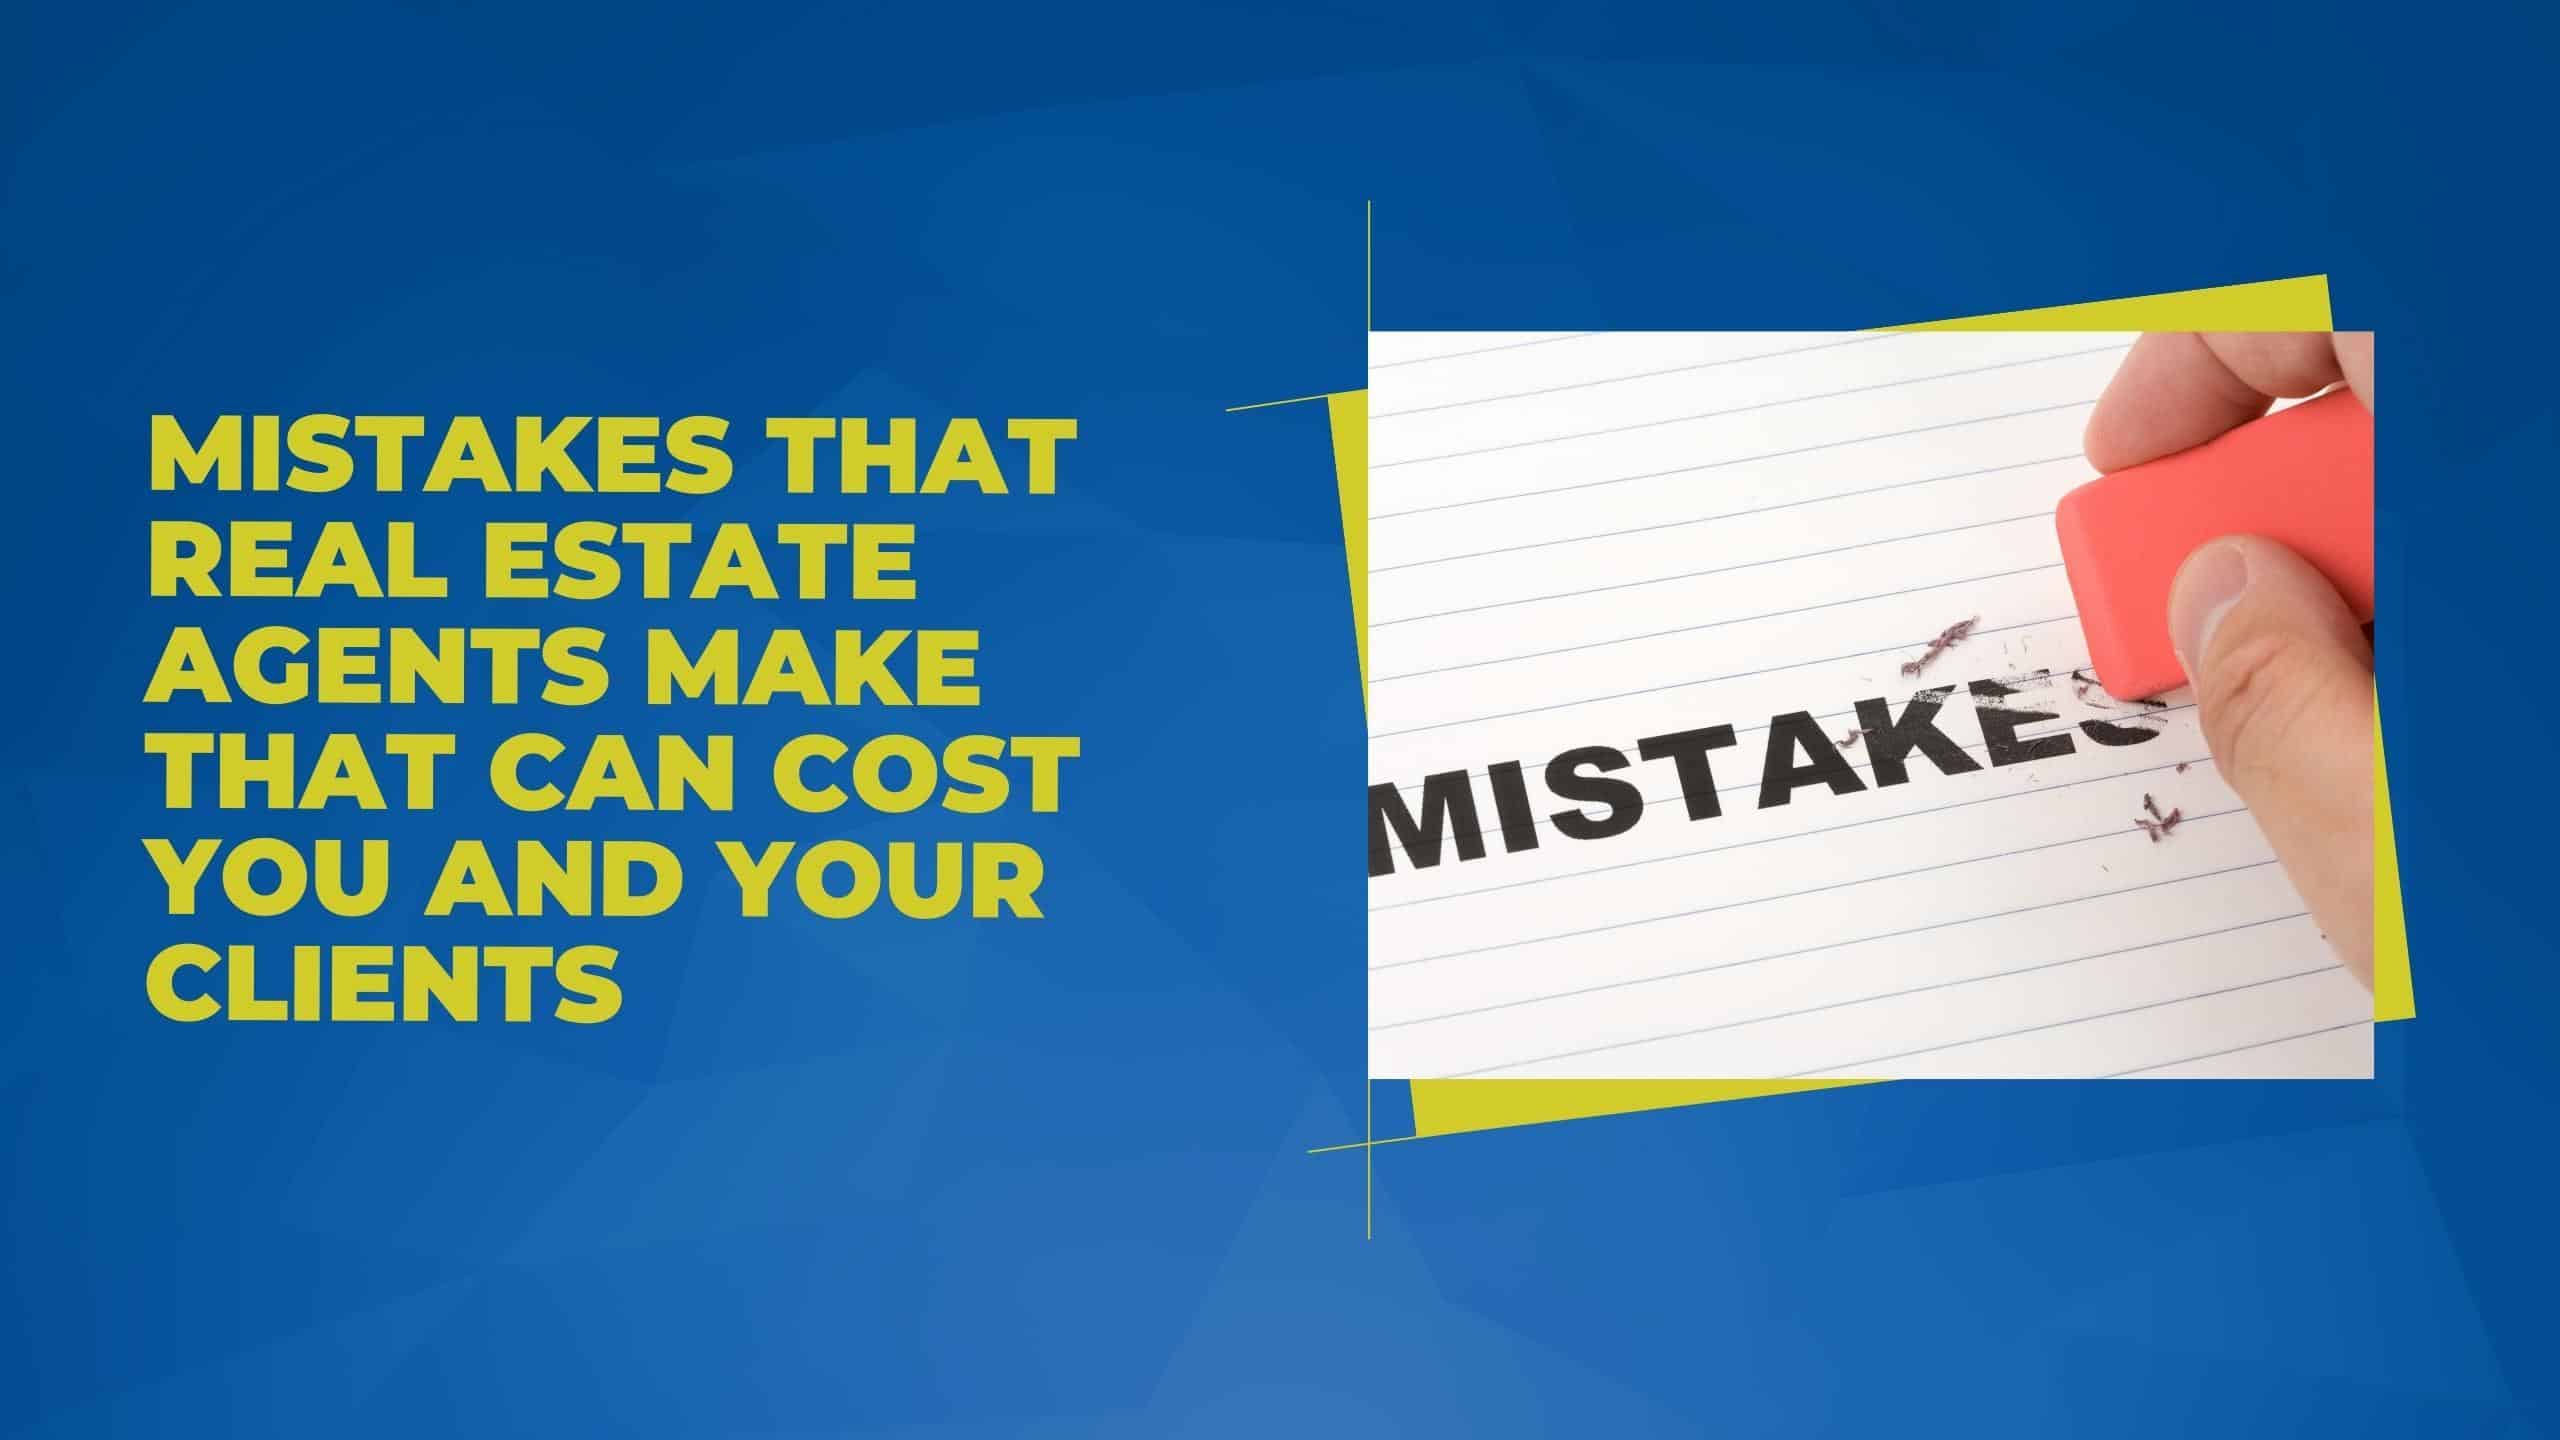 Mistakes That Real Estate Agents Make That Can Cost You and Your Clients